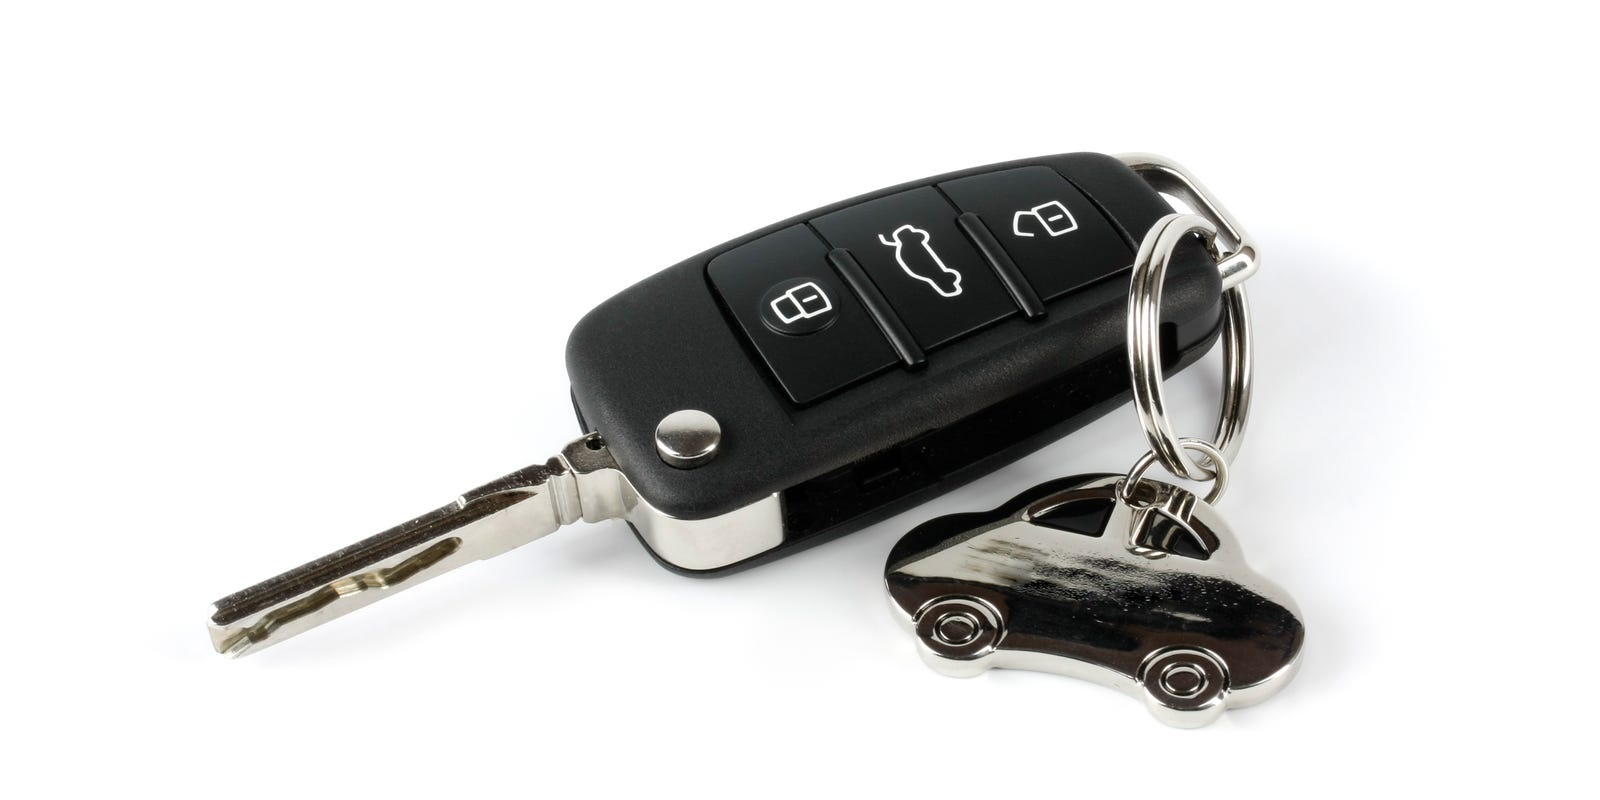 We make car keys for almost any vehicle